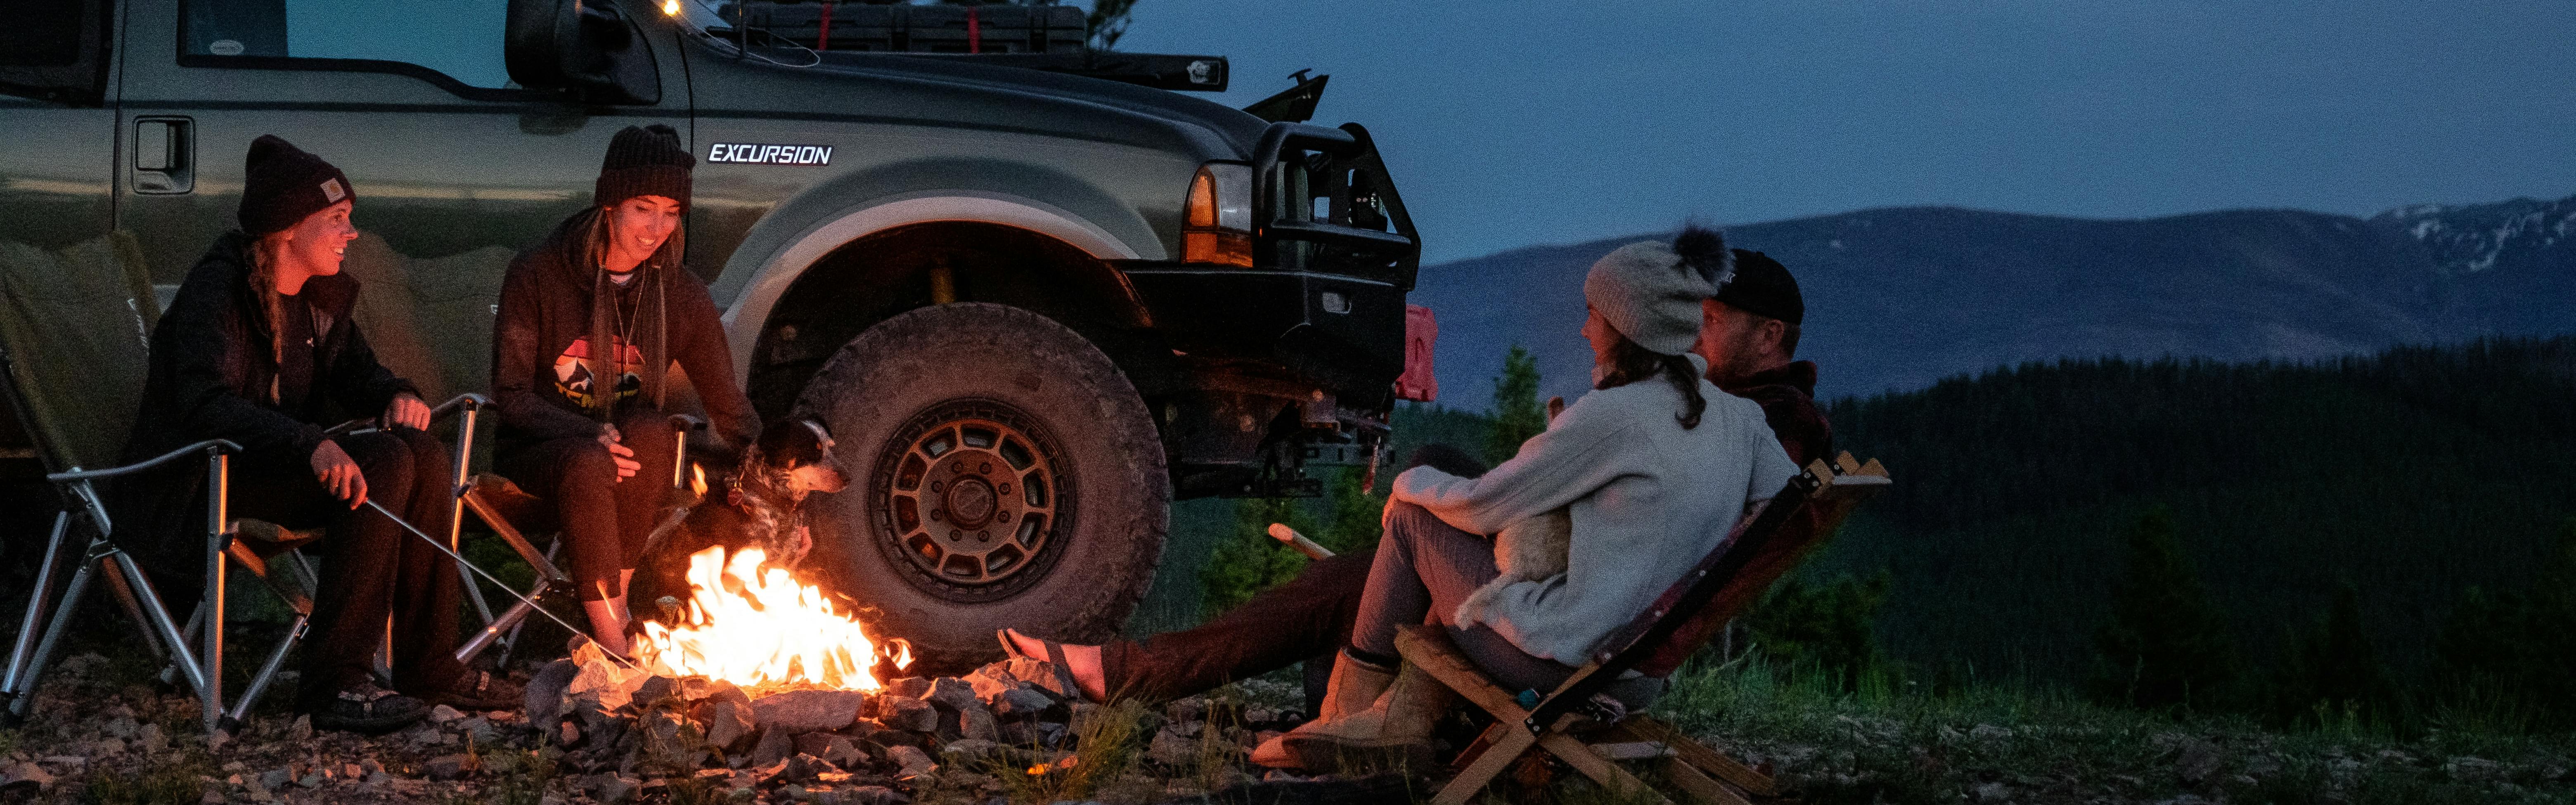 Four people sit around a campfire next to their car at night.